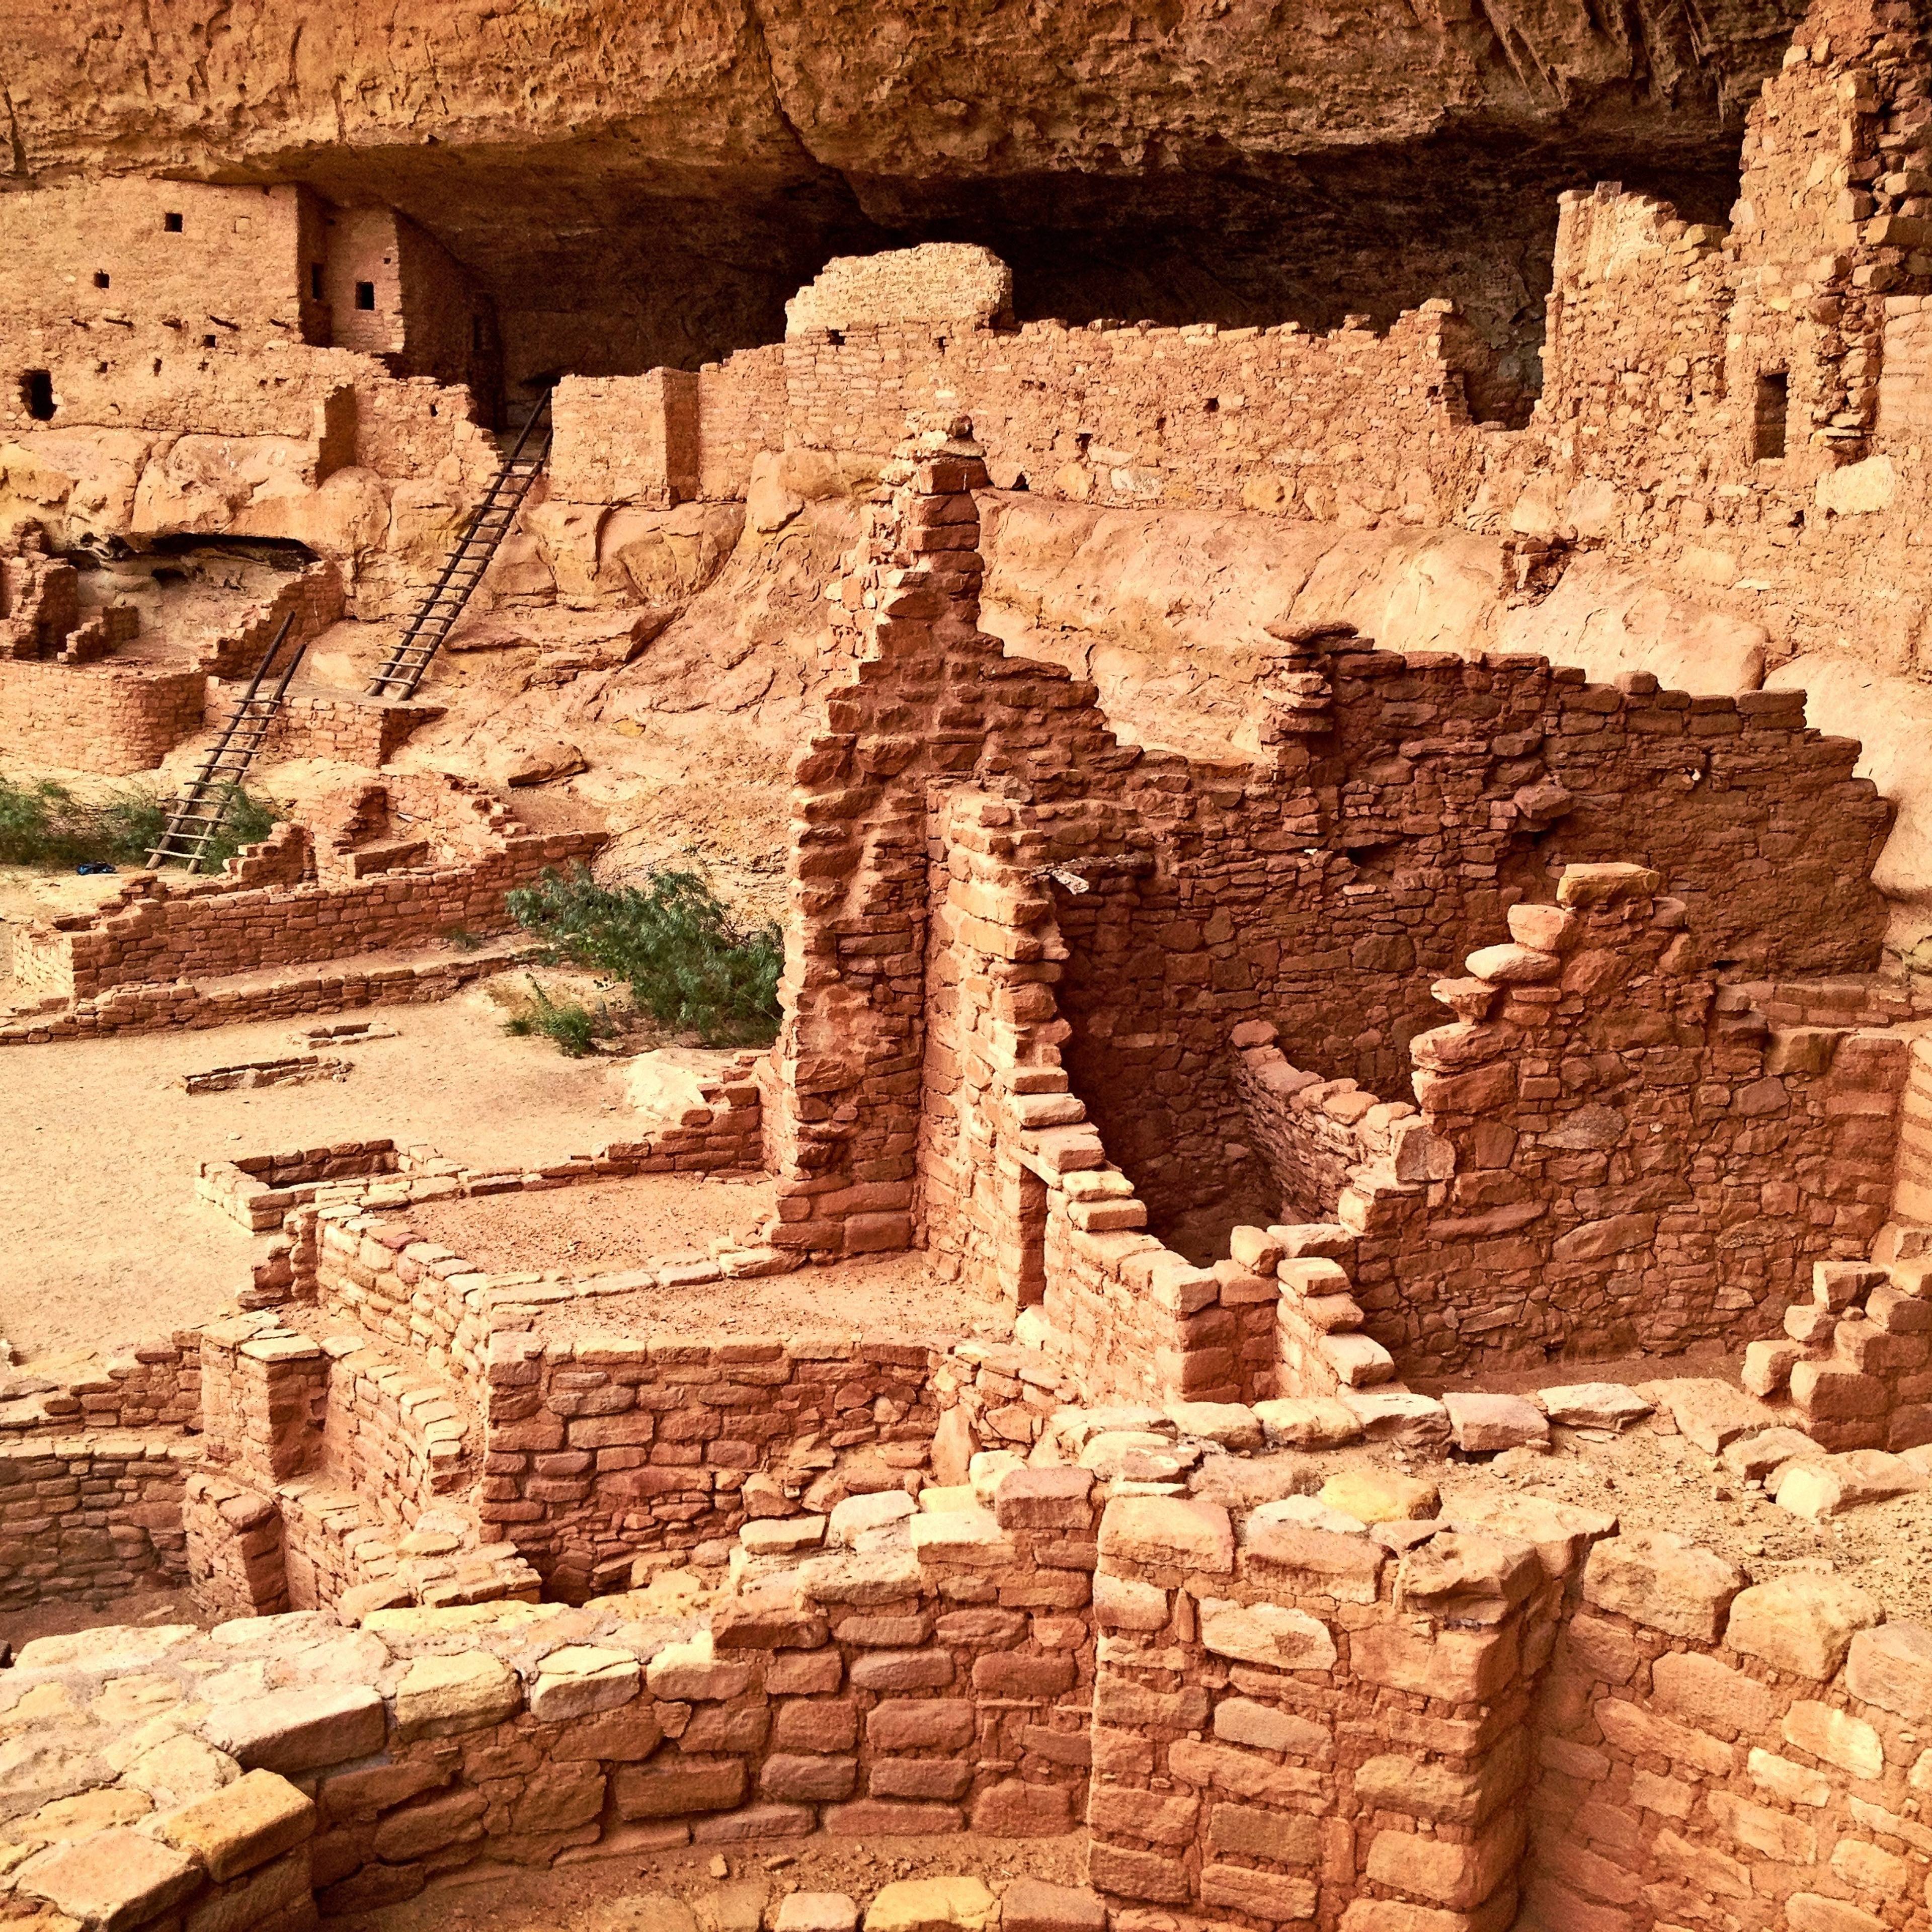 ⚡️ Explore the Cliff Dwellings in Mesa Verde National Park